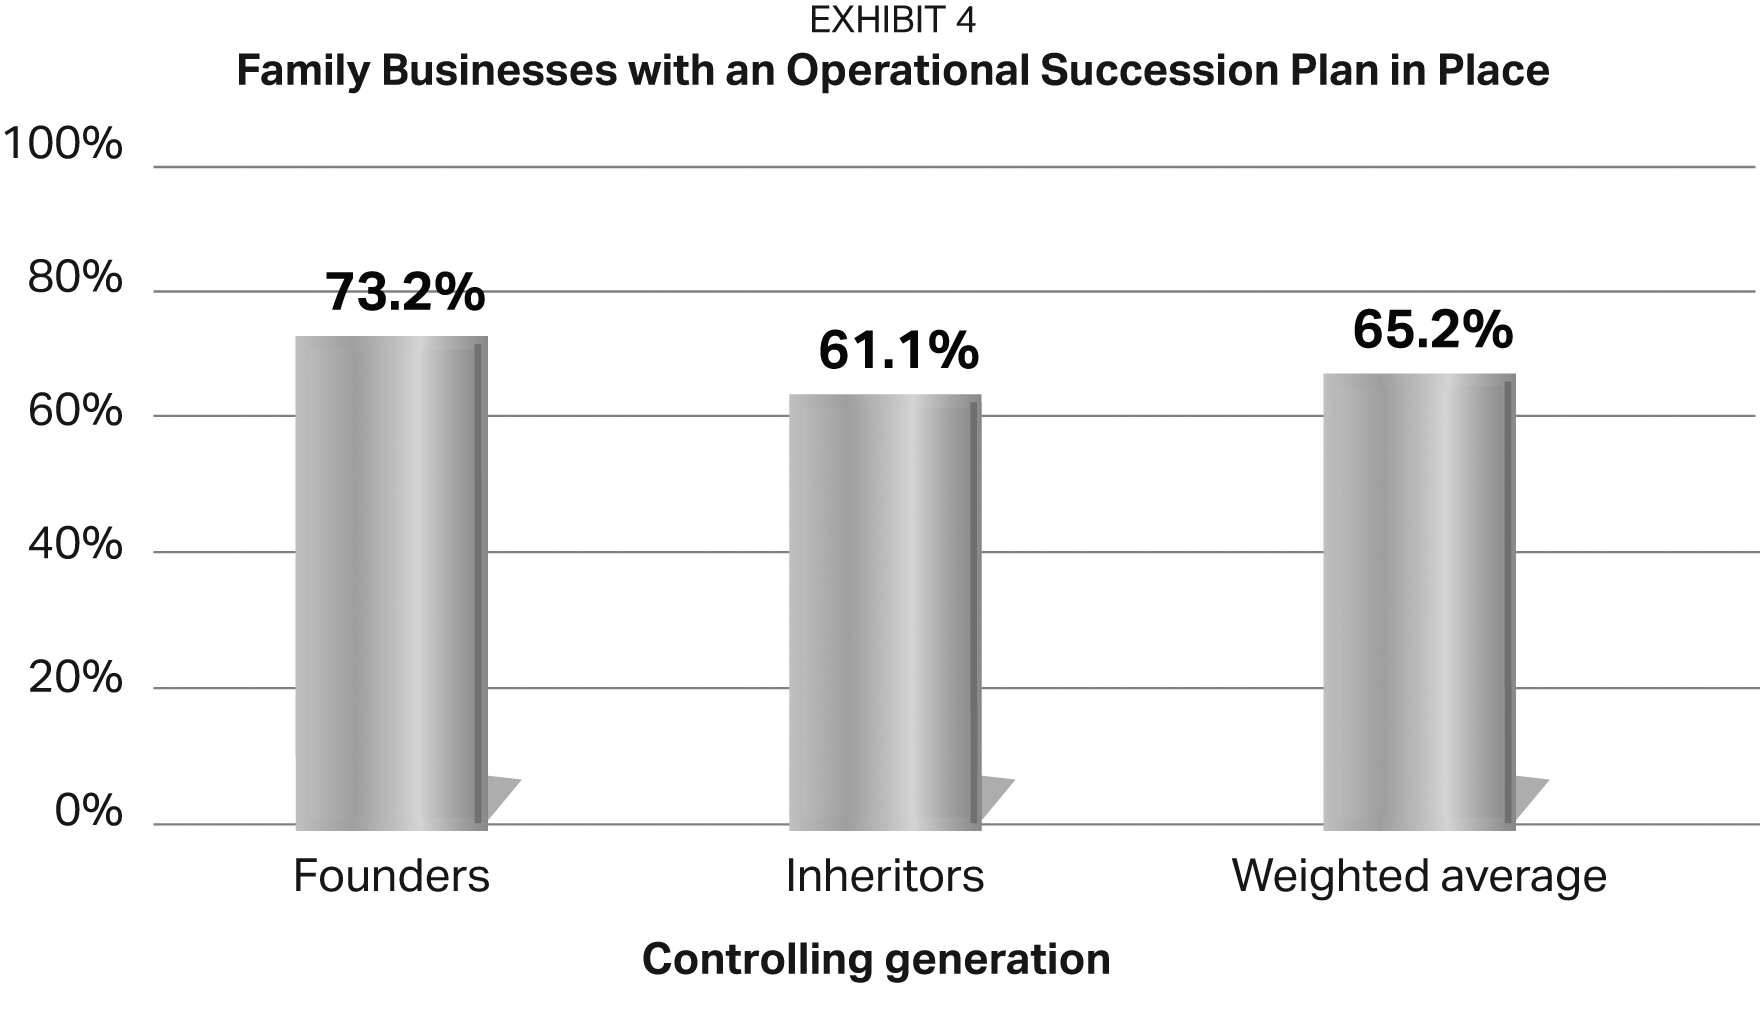 family businesses with an operational succession plan in place